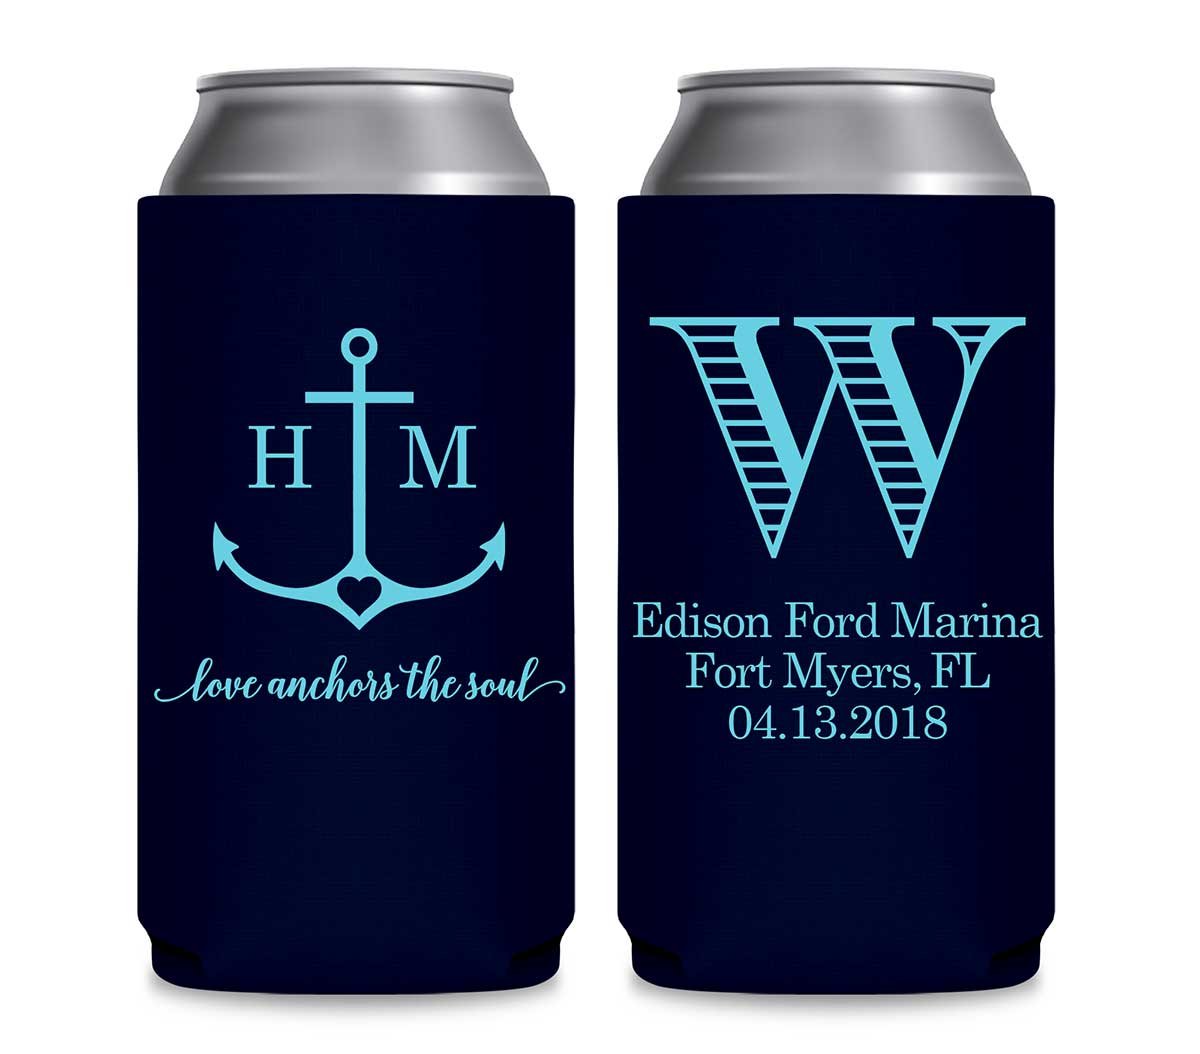 Love Anchors The Soul 2A Foldable 12 oz Slim Can Koozies Wedding Gifts for Guests